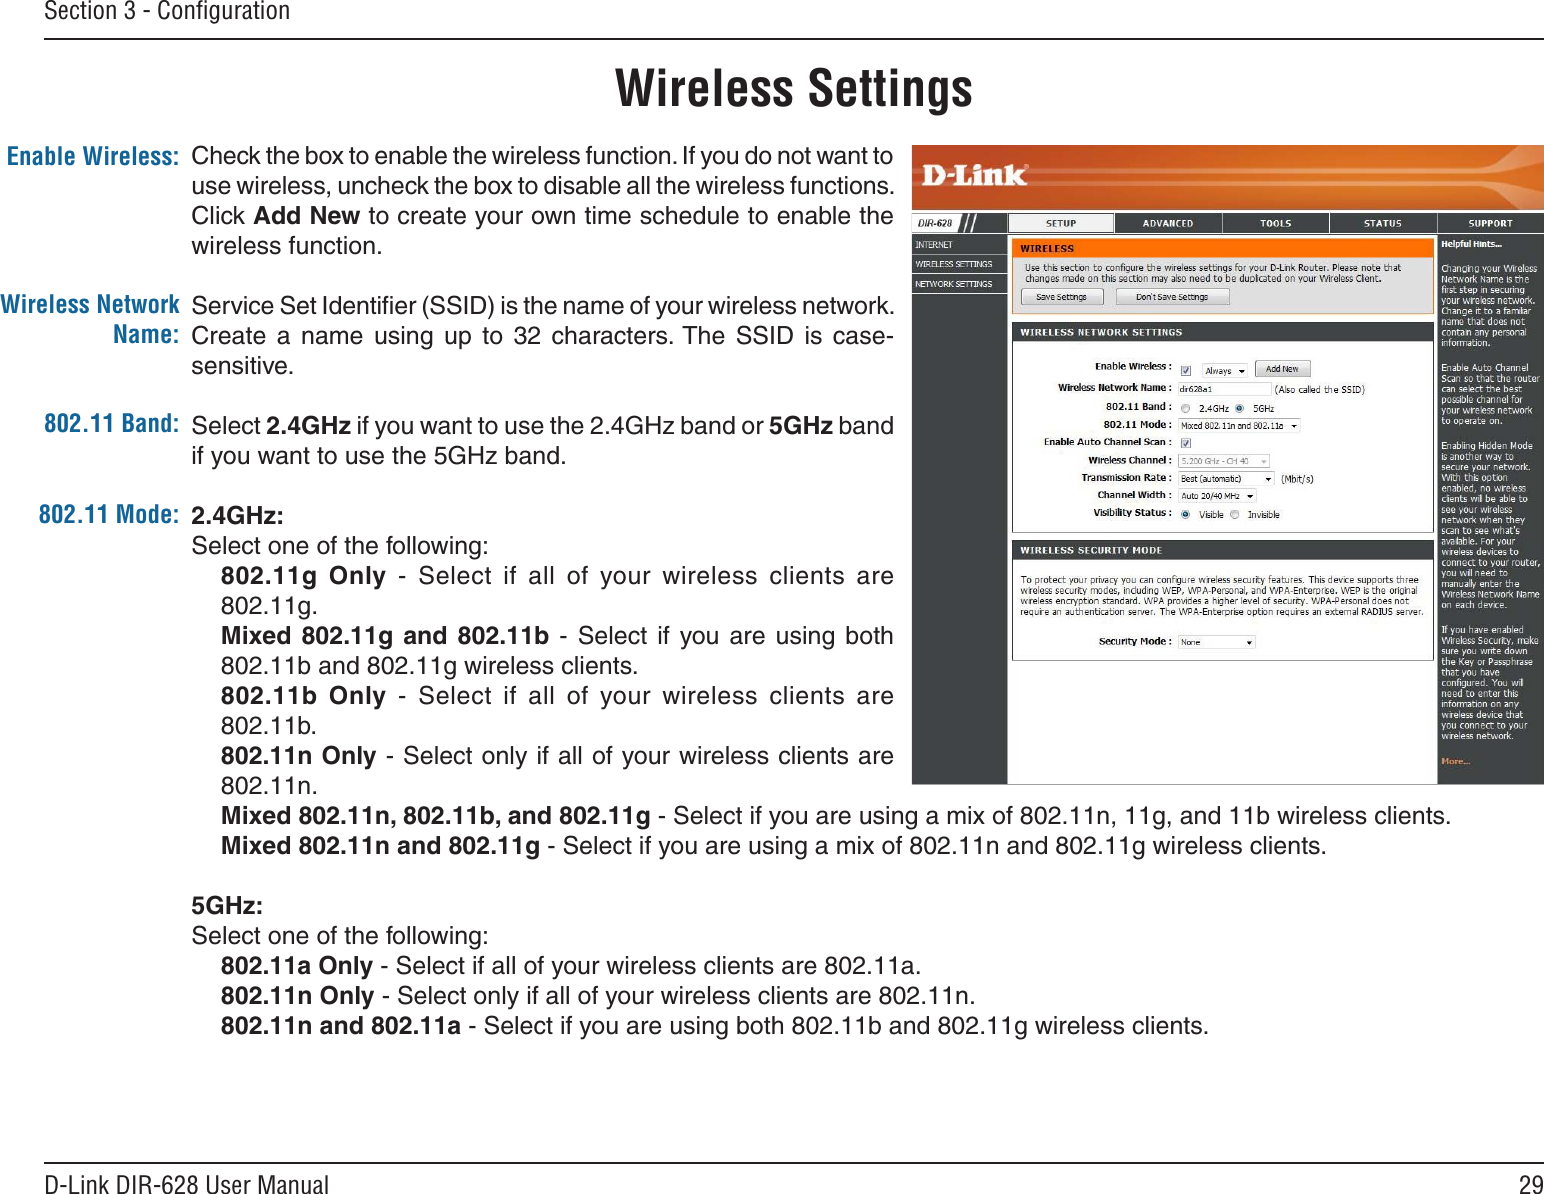 29D-Link DIR-628 User ManualSection 3 - ConﬁgurationWireless SettingsCheck the box to enable the wireless function. If you do not want to use wireless, uncheck the box to disable all the wireless functions. Click Add New to create your own time schedule to enable the wireless function. Service Set Identiﬁer (SSID) is the name of your wireless network. Create  a  name  using  up  to  32  characters. The  SSID  is  case-sensitive.Select 2.4GHz if you want to use the 2.4GHz band or 5GHz band if you want to use the 5GHz band. 2.4GHz:Select one of the following:802.11g  Only  -  Select  if  all  of  your  wireless  clients  are 802.11g.Mixed 802.11g  and  802.11b  - Select  if  you are  using both 802.11b and 802.11g wireless clients.802.11b  Only  -  Select  if  all  of  your  wireless  clients  are 802.11b.802.11n Only - Select only if all of your wireless clients are 802.11n.Mixed 802.11n, 802.11b, and 802.11g - Select if you are using a mix of 802.11n, 11g, and 11b wireless clients.Mixed 802.11n and 802.11g - Select if you are using a mix of 802.11n and 802.11g wireless clients.5GHz:Select one of the following:802.11a Only - Select if all of your wireless clients are 802.11a.802.11n Only - Select only if all of your wireless clients are 802.11n.802.11n and 802.11a - Select if you are using both 802.11b and 802.11g wireless clients.Enable Wireless:Wireless Network Name:802.11 Mode:802.11 Band: